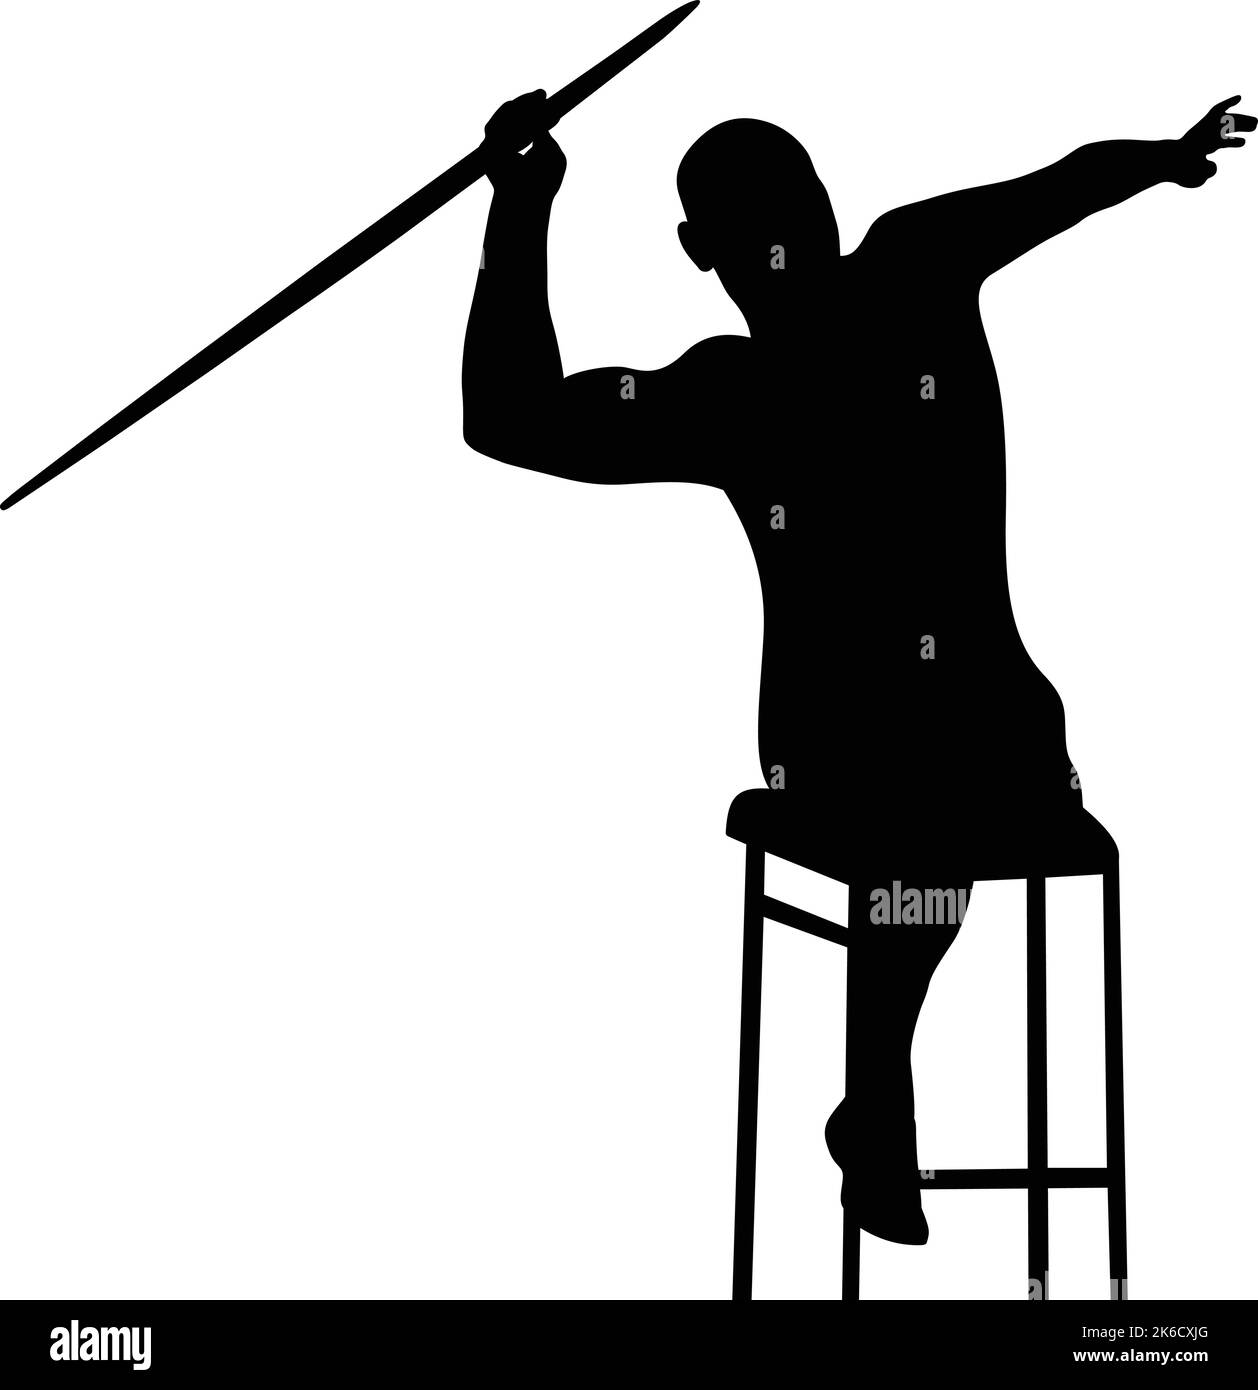 disabled athlete javelin throw black silhouette Stock Vector